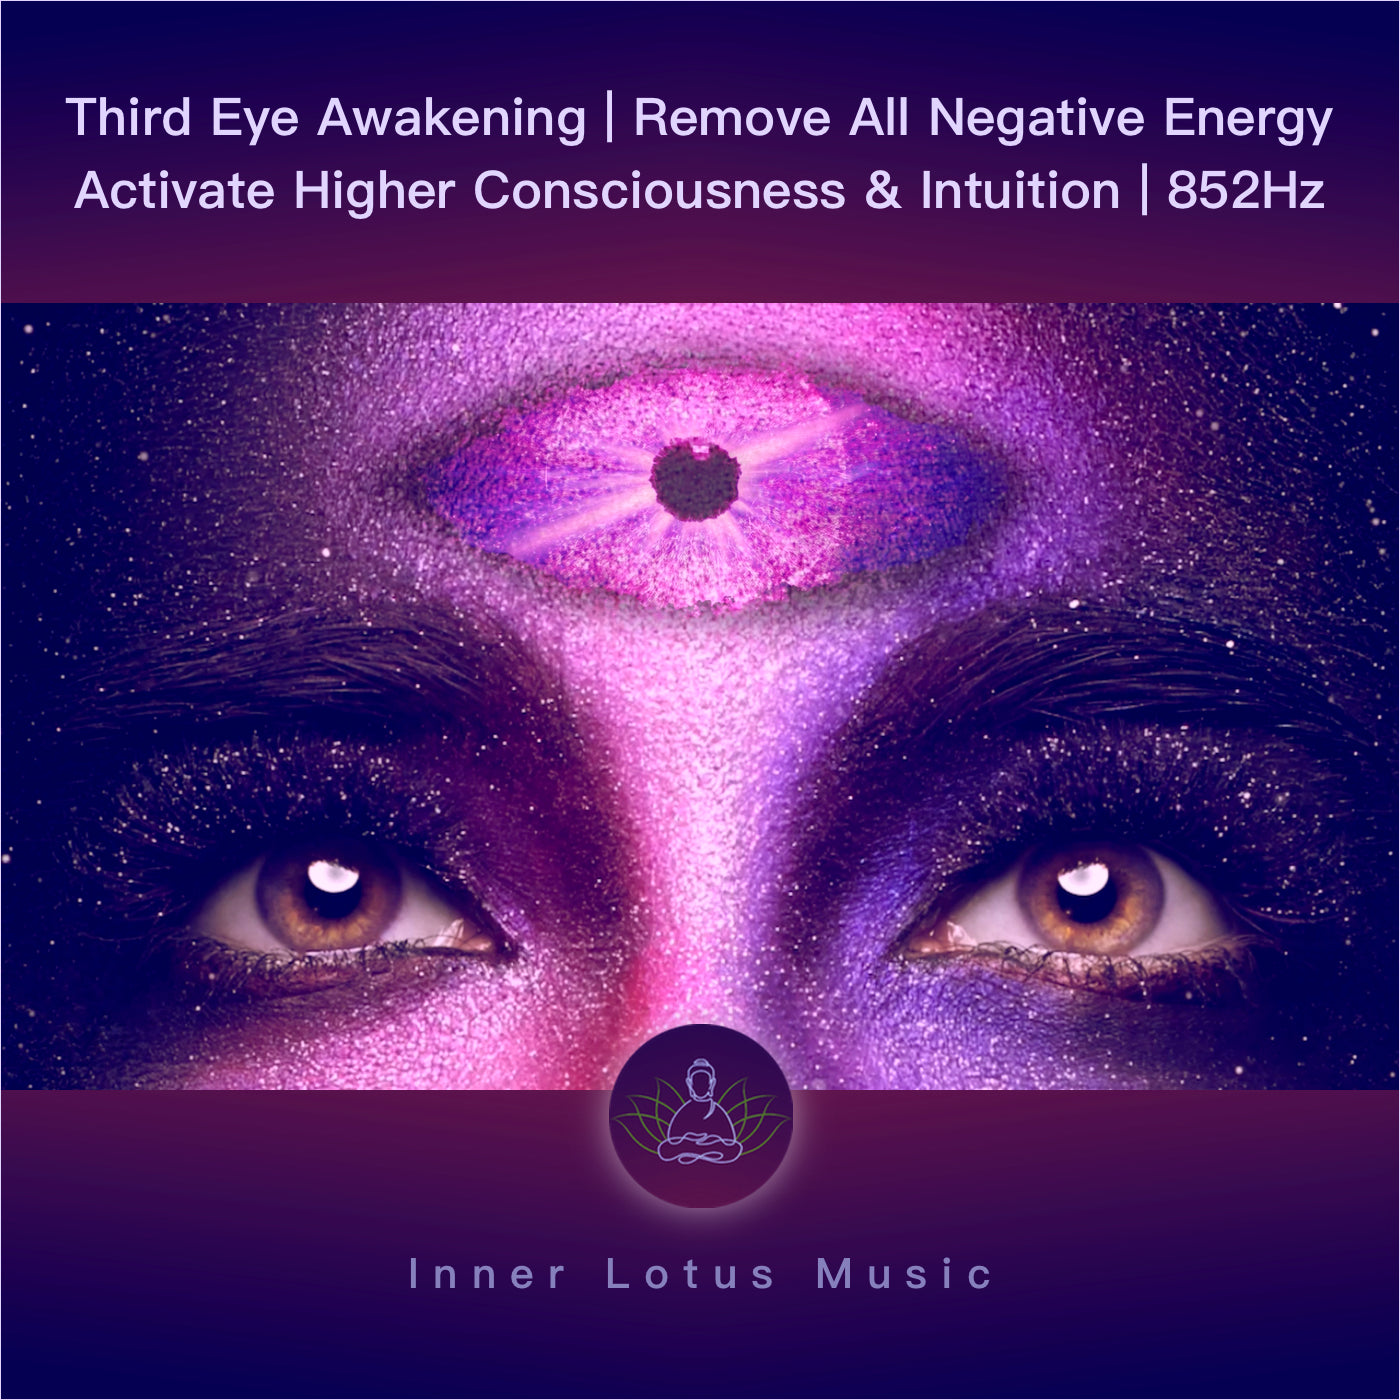 Third Eye Awakening | Remove All Negative Energy | Activate Higher Consciousness & Intuition | 852Hz